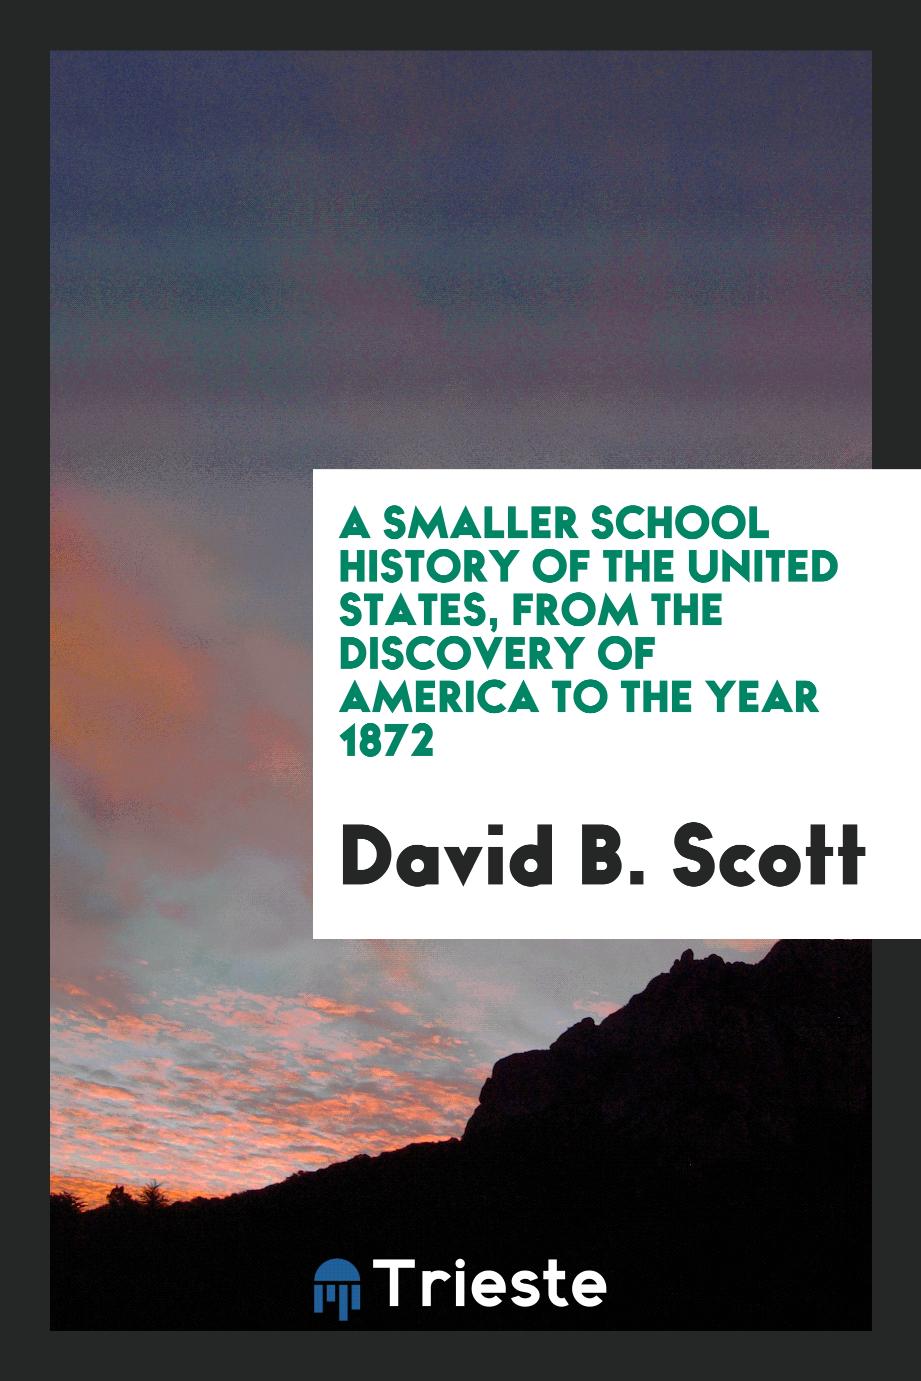 A smaller school history of the United States, from the discovery of America to the year 1872